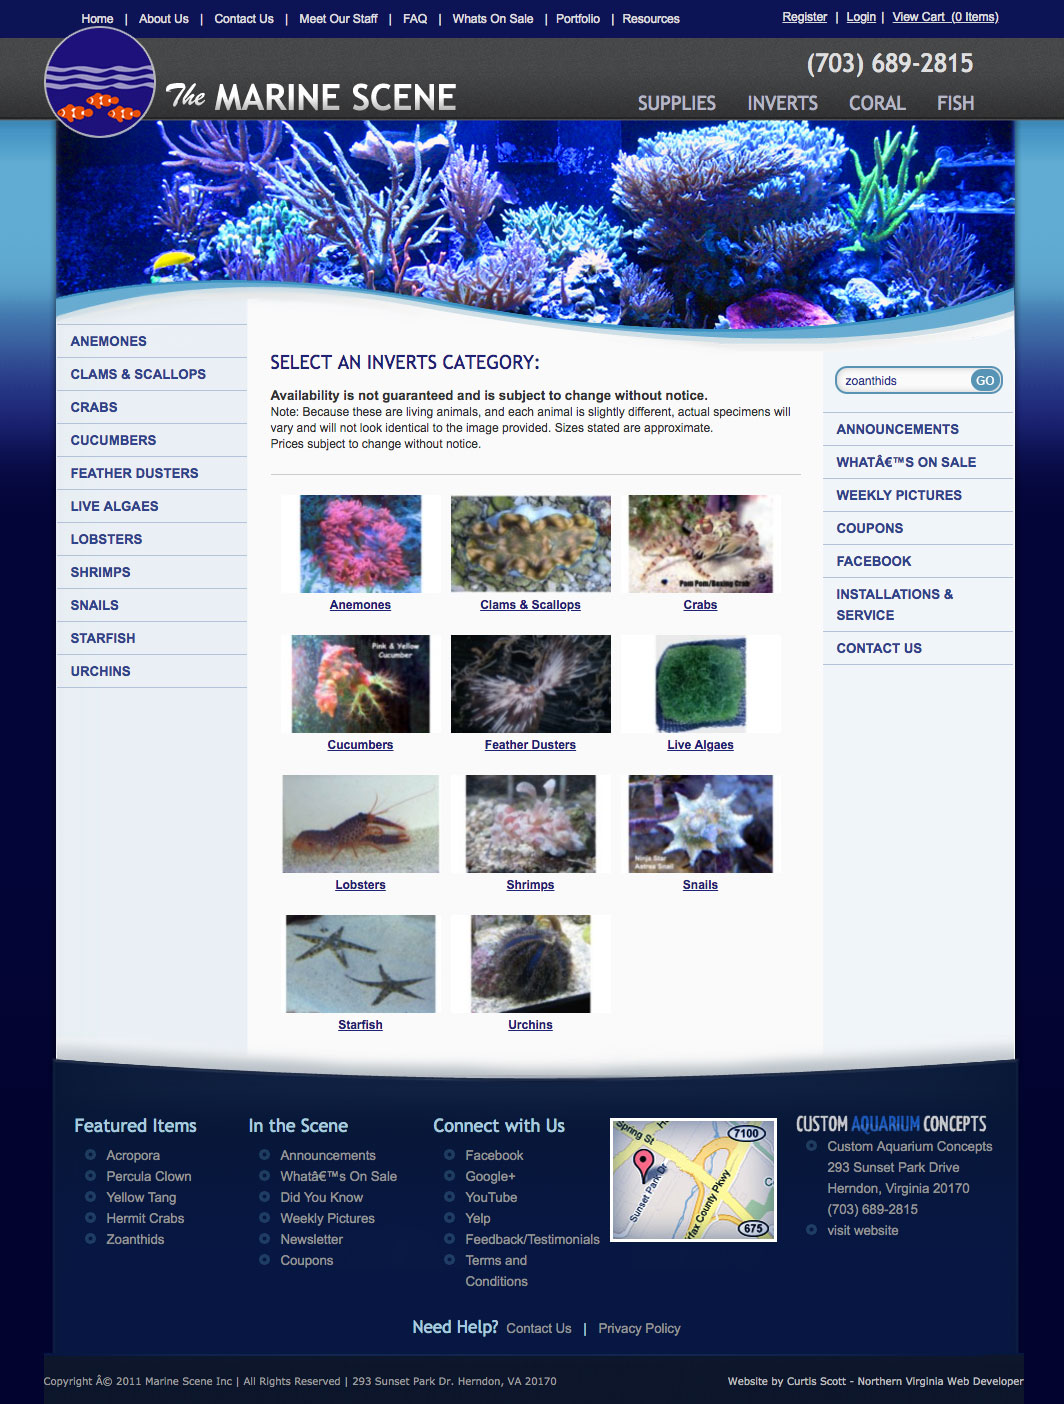 The Marine Scene UI design screenshot of the inverts category page